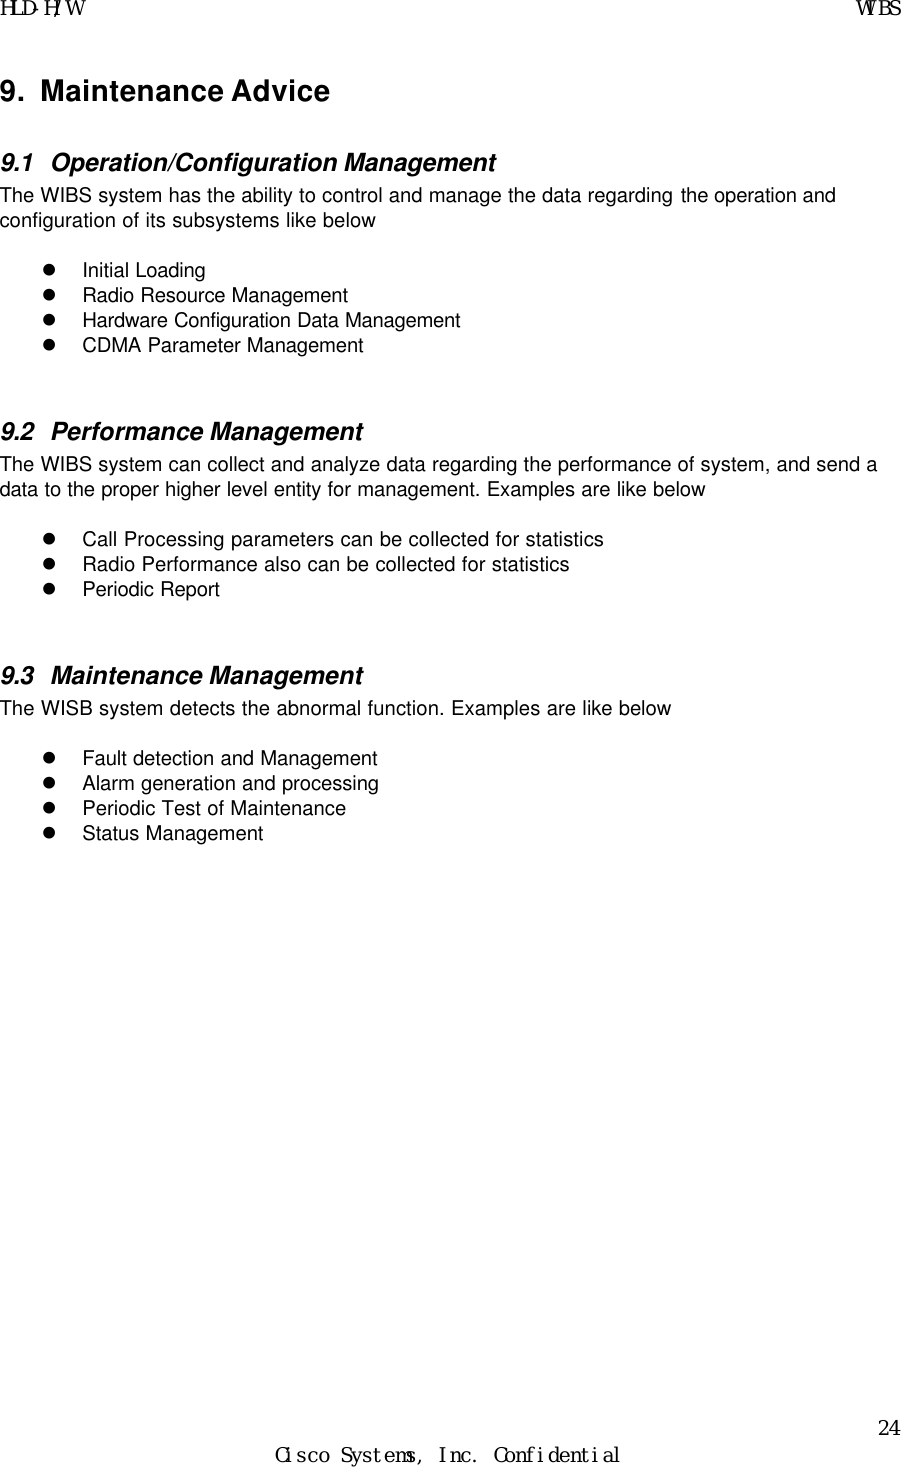 HLD-H/W    WIBS 24 Cisco Systems, Inc. Confidential  9. Maintenance Advice 9.1 Operation/Configuration Management The WIBS system has the ability to control and manage the data regarding the operation and configuration of its subsystems like below  l Initial Loading l Radio Resource Management l Hardware Configuration Data Management l CDMA Parameter Management  9.2 Performance Management The WIBS system can collect and analyze data regarding the performance of system, and send a data to the proper higher level entity for management. Examples are like below  l Call Processing parameters can be collected for statistics l Radio Performance also can be collected for statistics l Periodic Report  9.3 Maintenance Management The WISB system detects the abnormal function. Examples are like below  l Fault detection and Management l Alarm generation and processing l Periodic Test of Maintenance l Status Management         